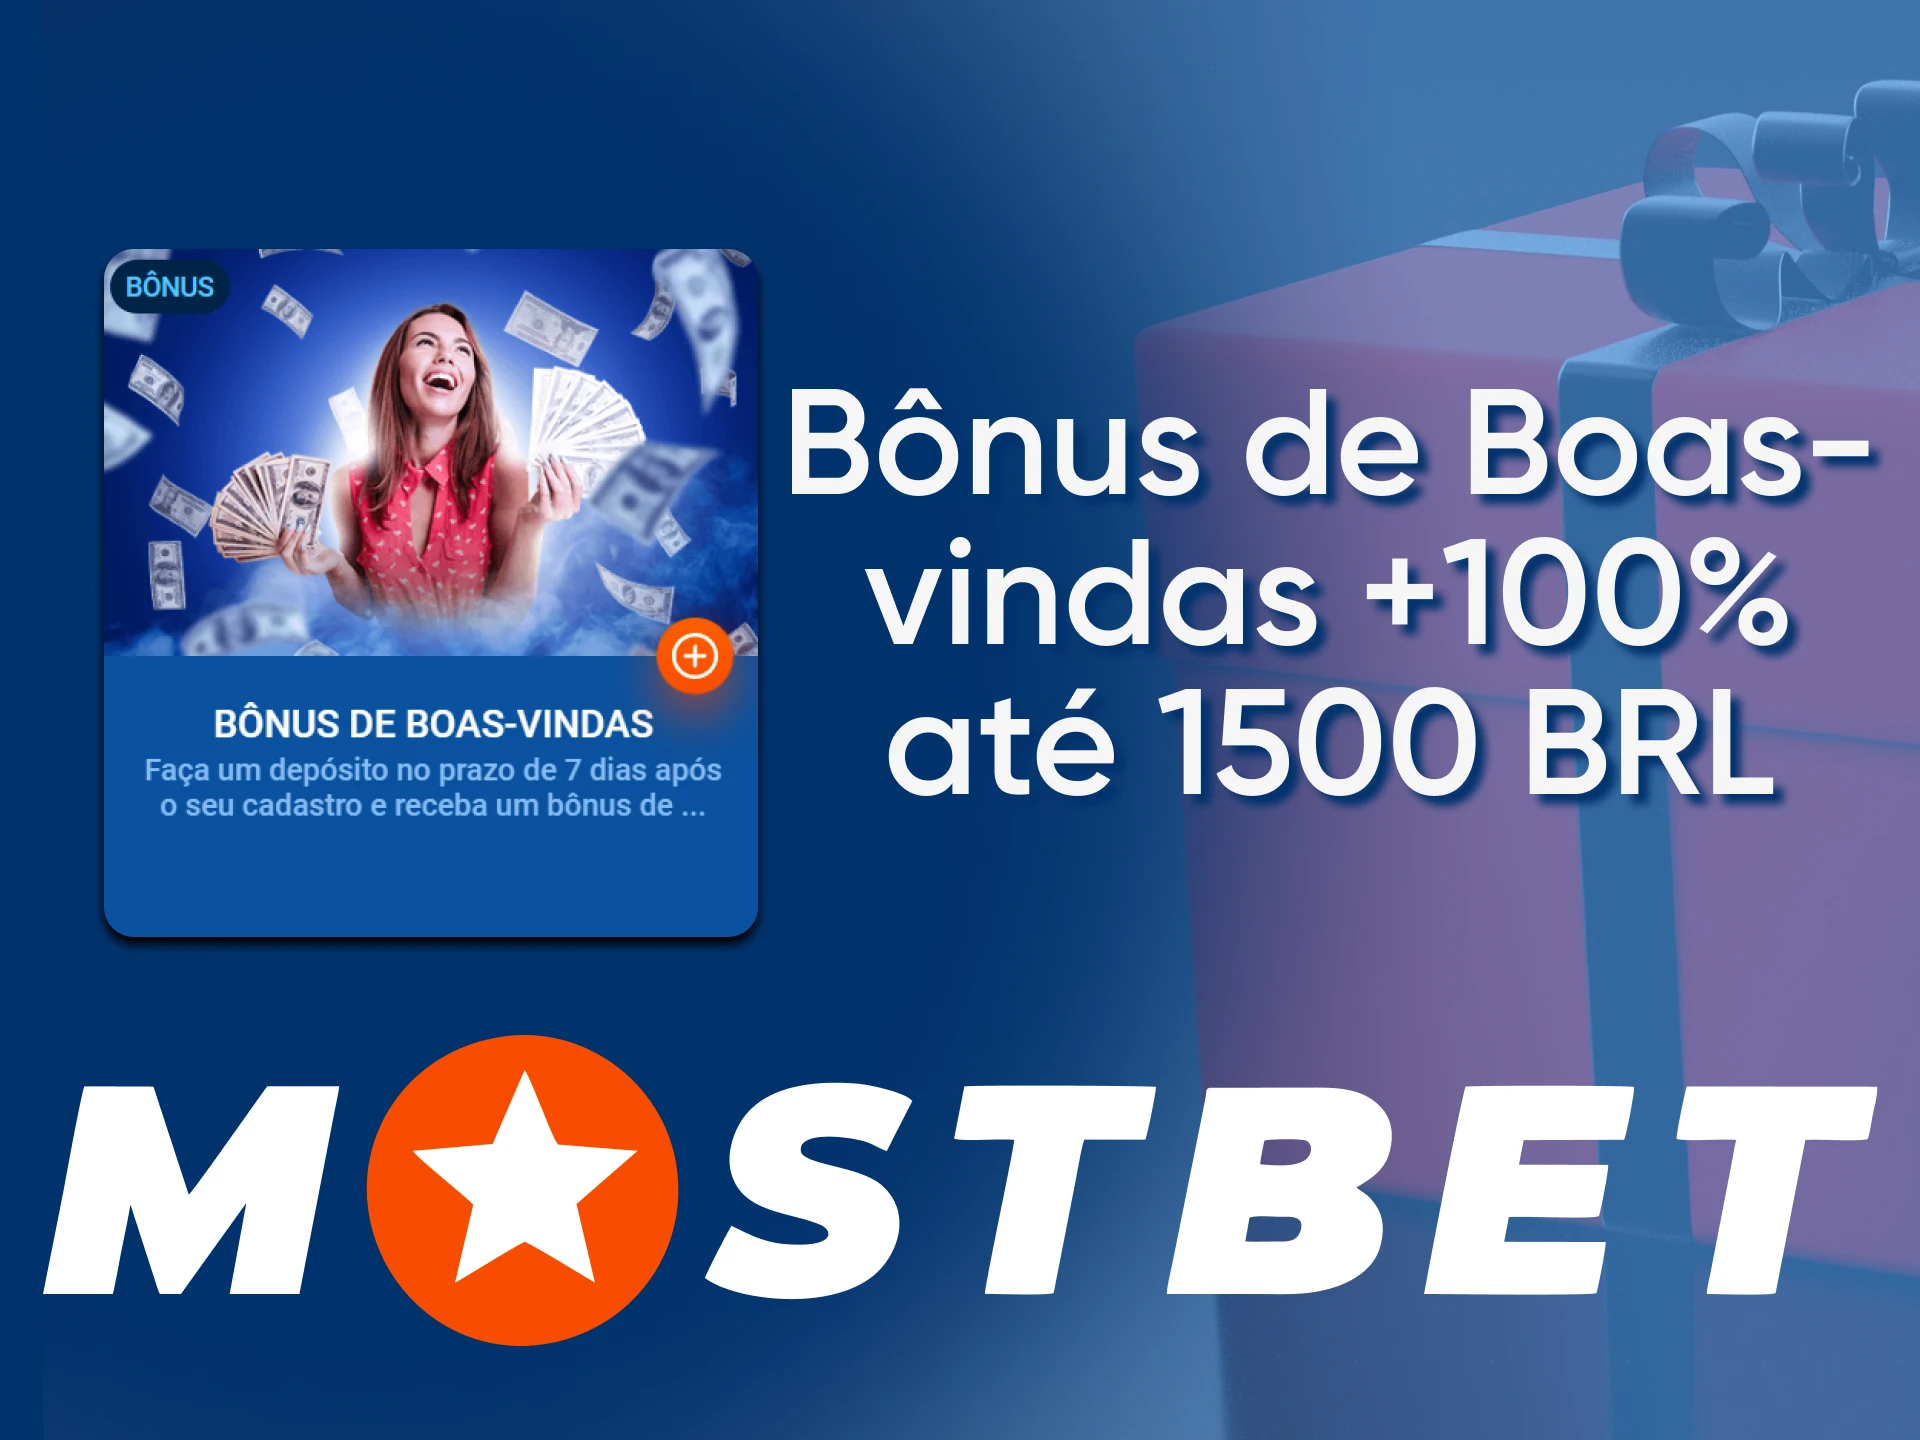 Mostbet offers a first deposit bonus to all new users.